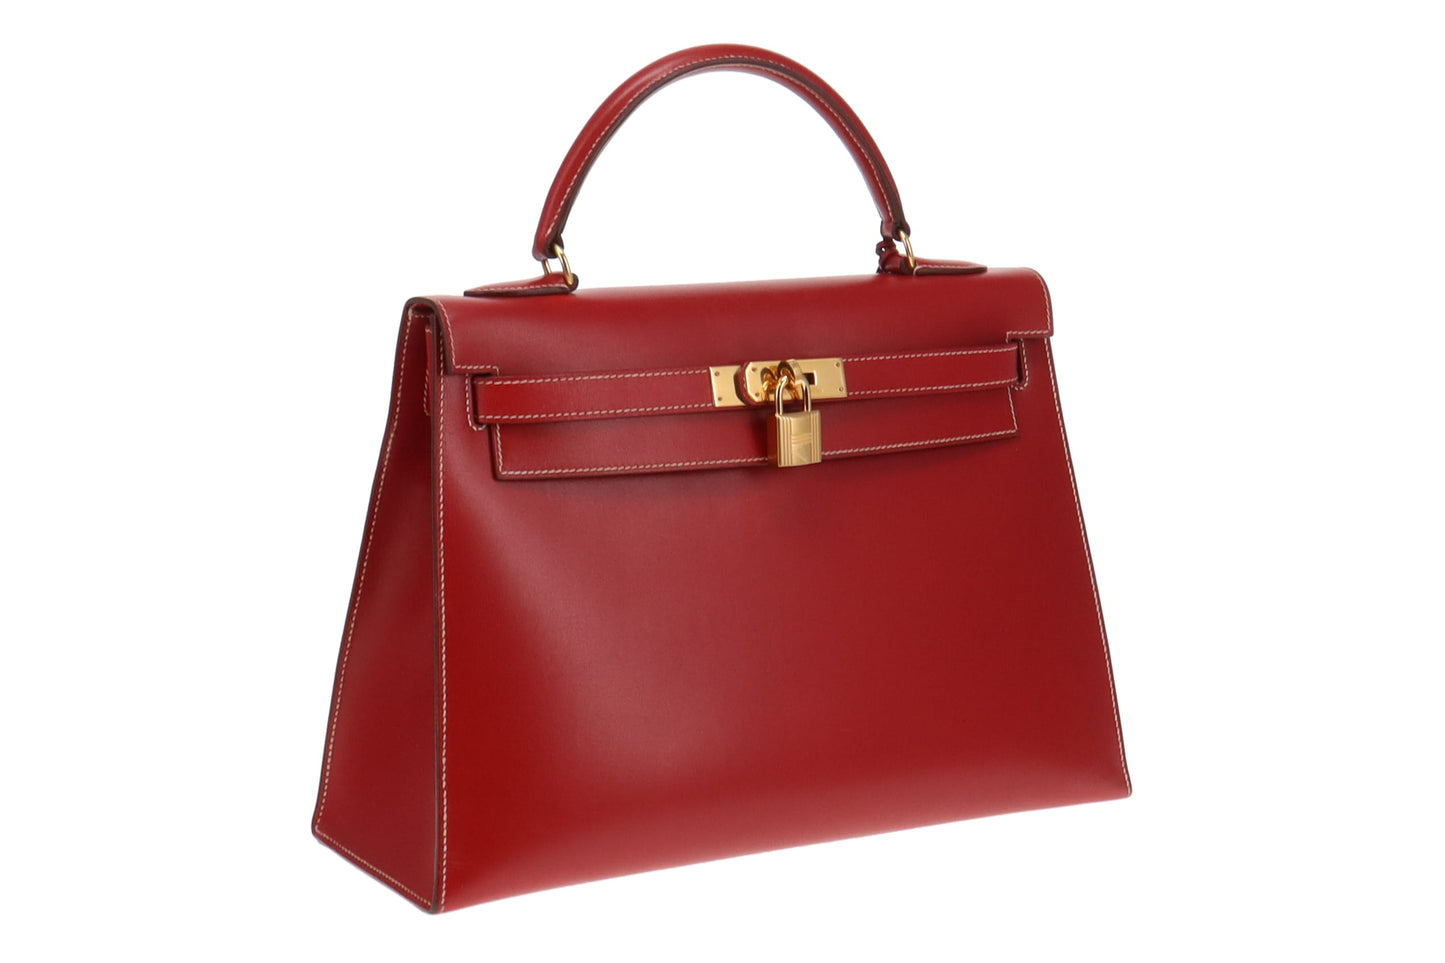 Hermes Brique Box Leather with White Contrast Stitching Kelly 32 with 2 straps 1992 (V in a circle)